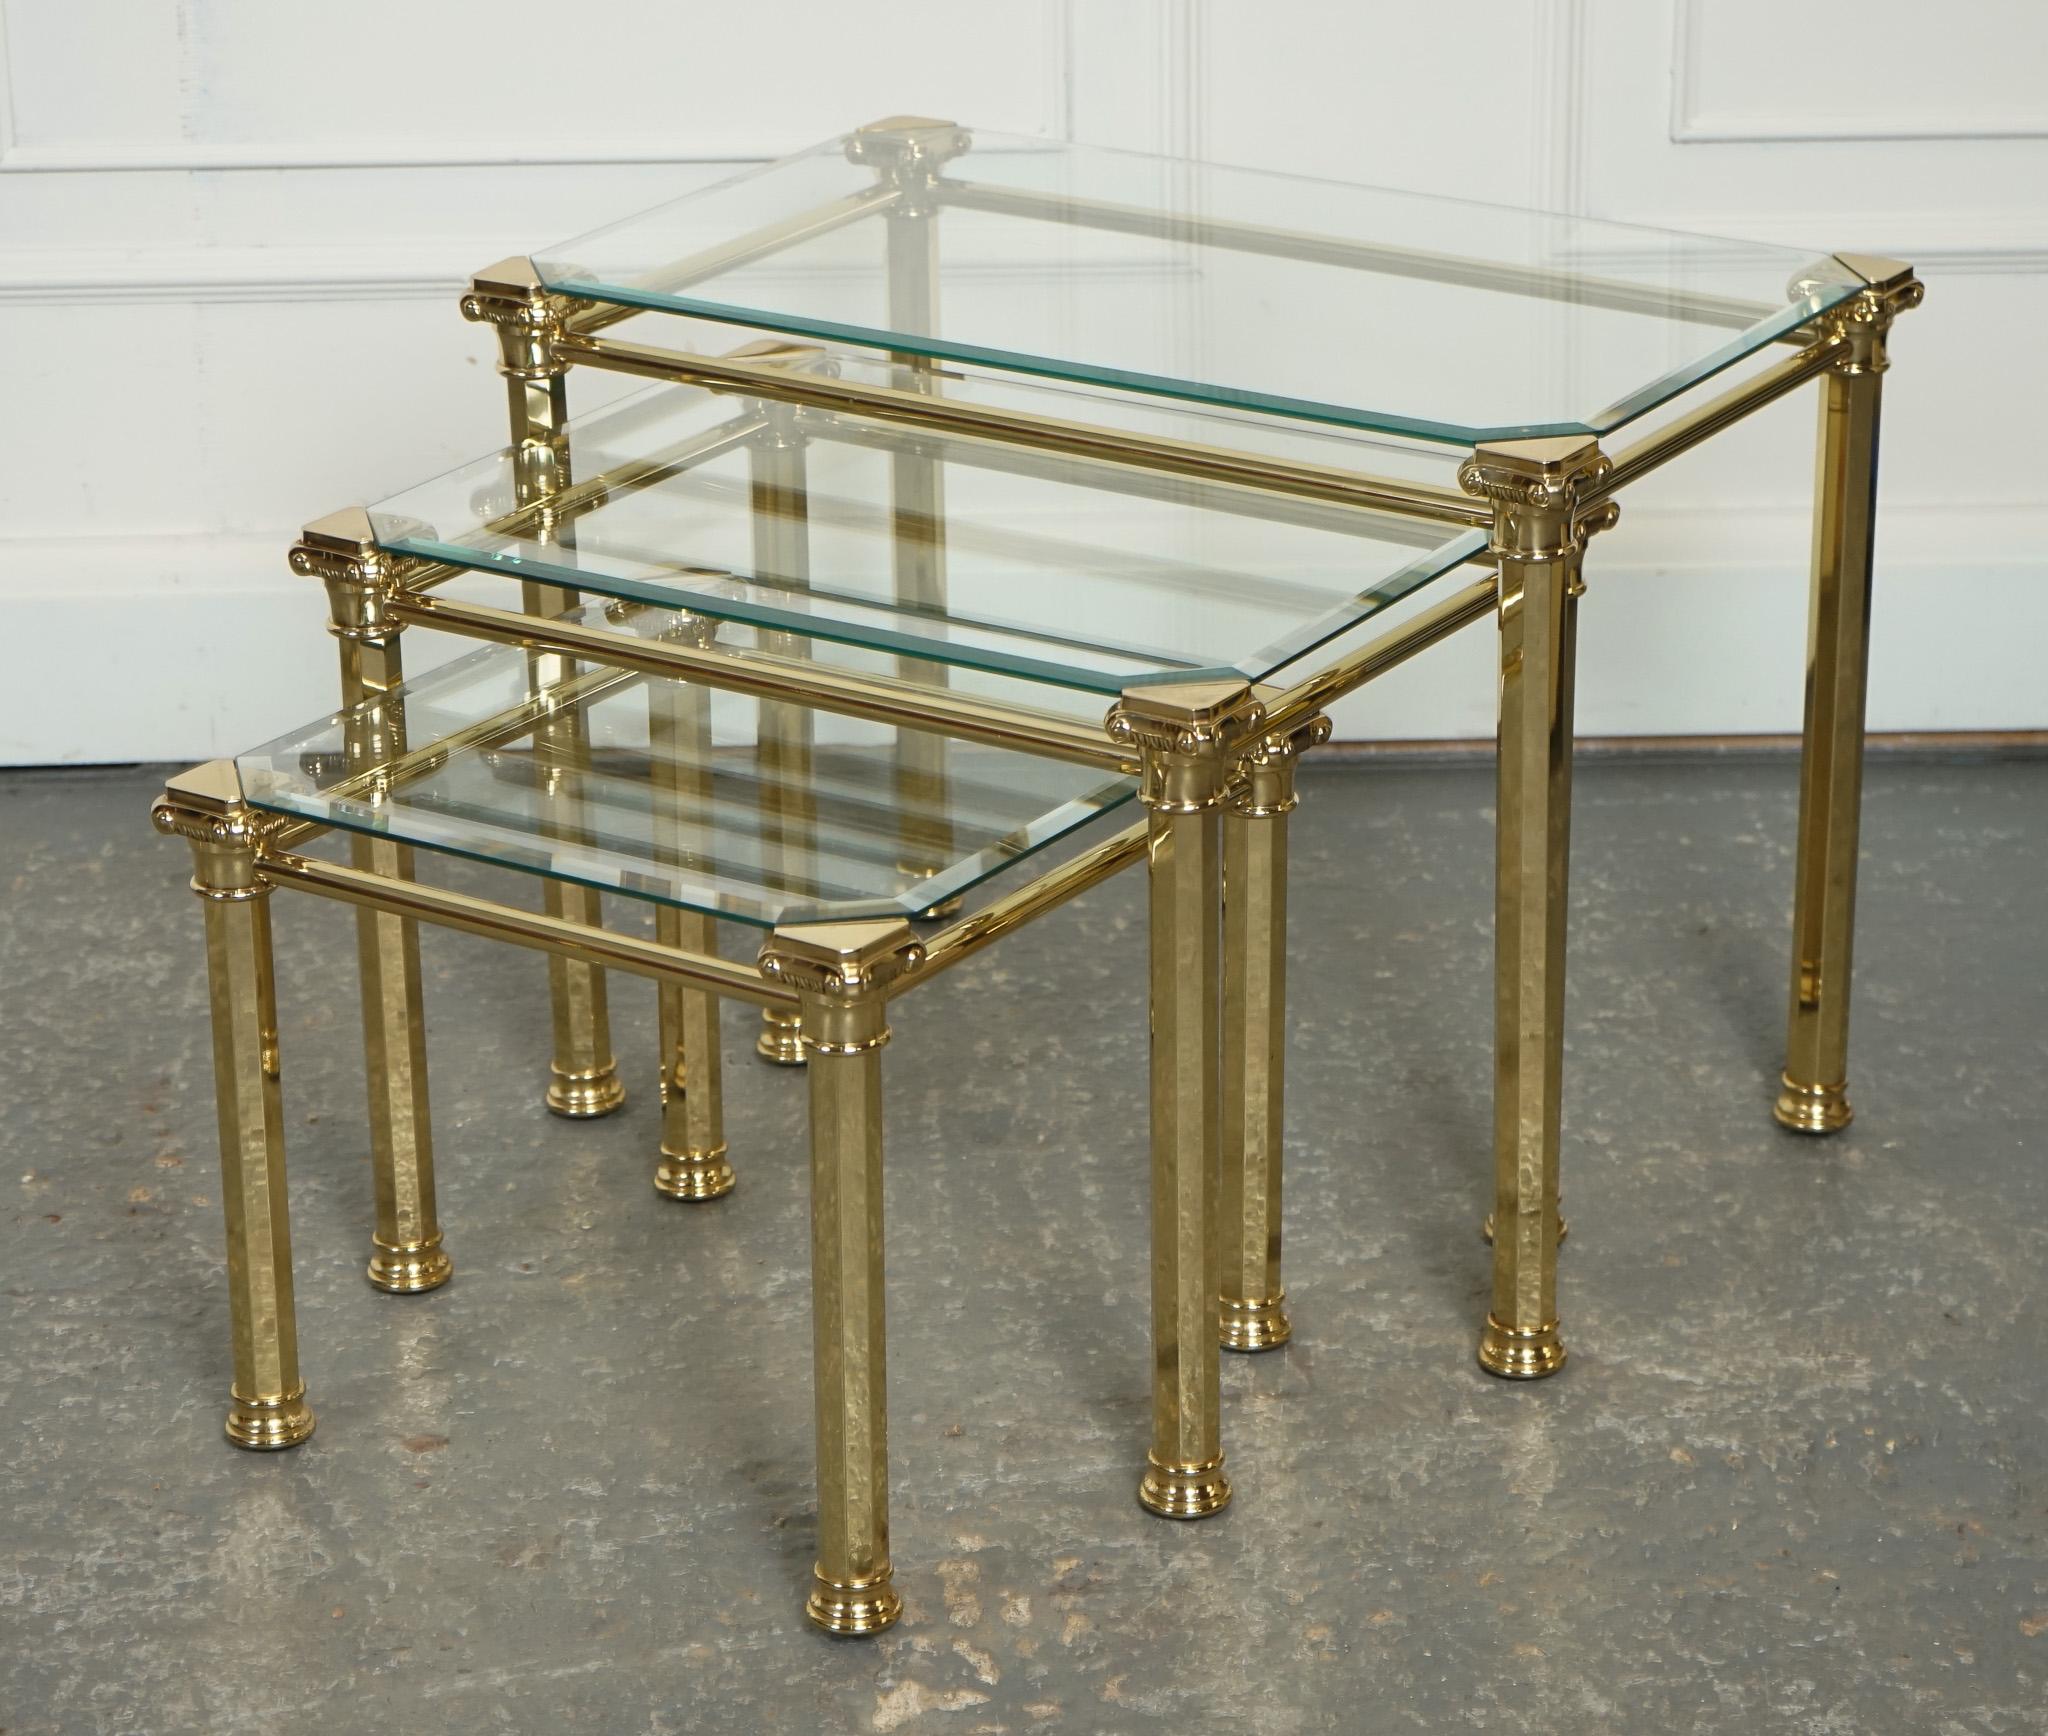 We are delighted to offer for sale this Set of 1970s Hollywood Regency Brass & Glass Nest of Tables Including the Side Table.

A luxurious and glamorous piece of furniture that embodies the opulence and extravagance of the Hollywood Regency style